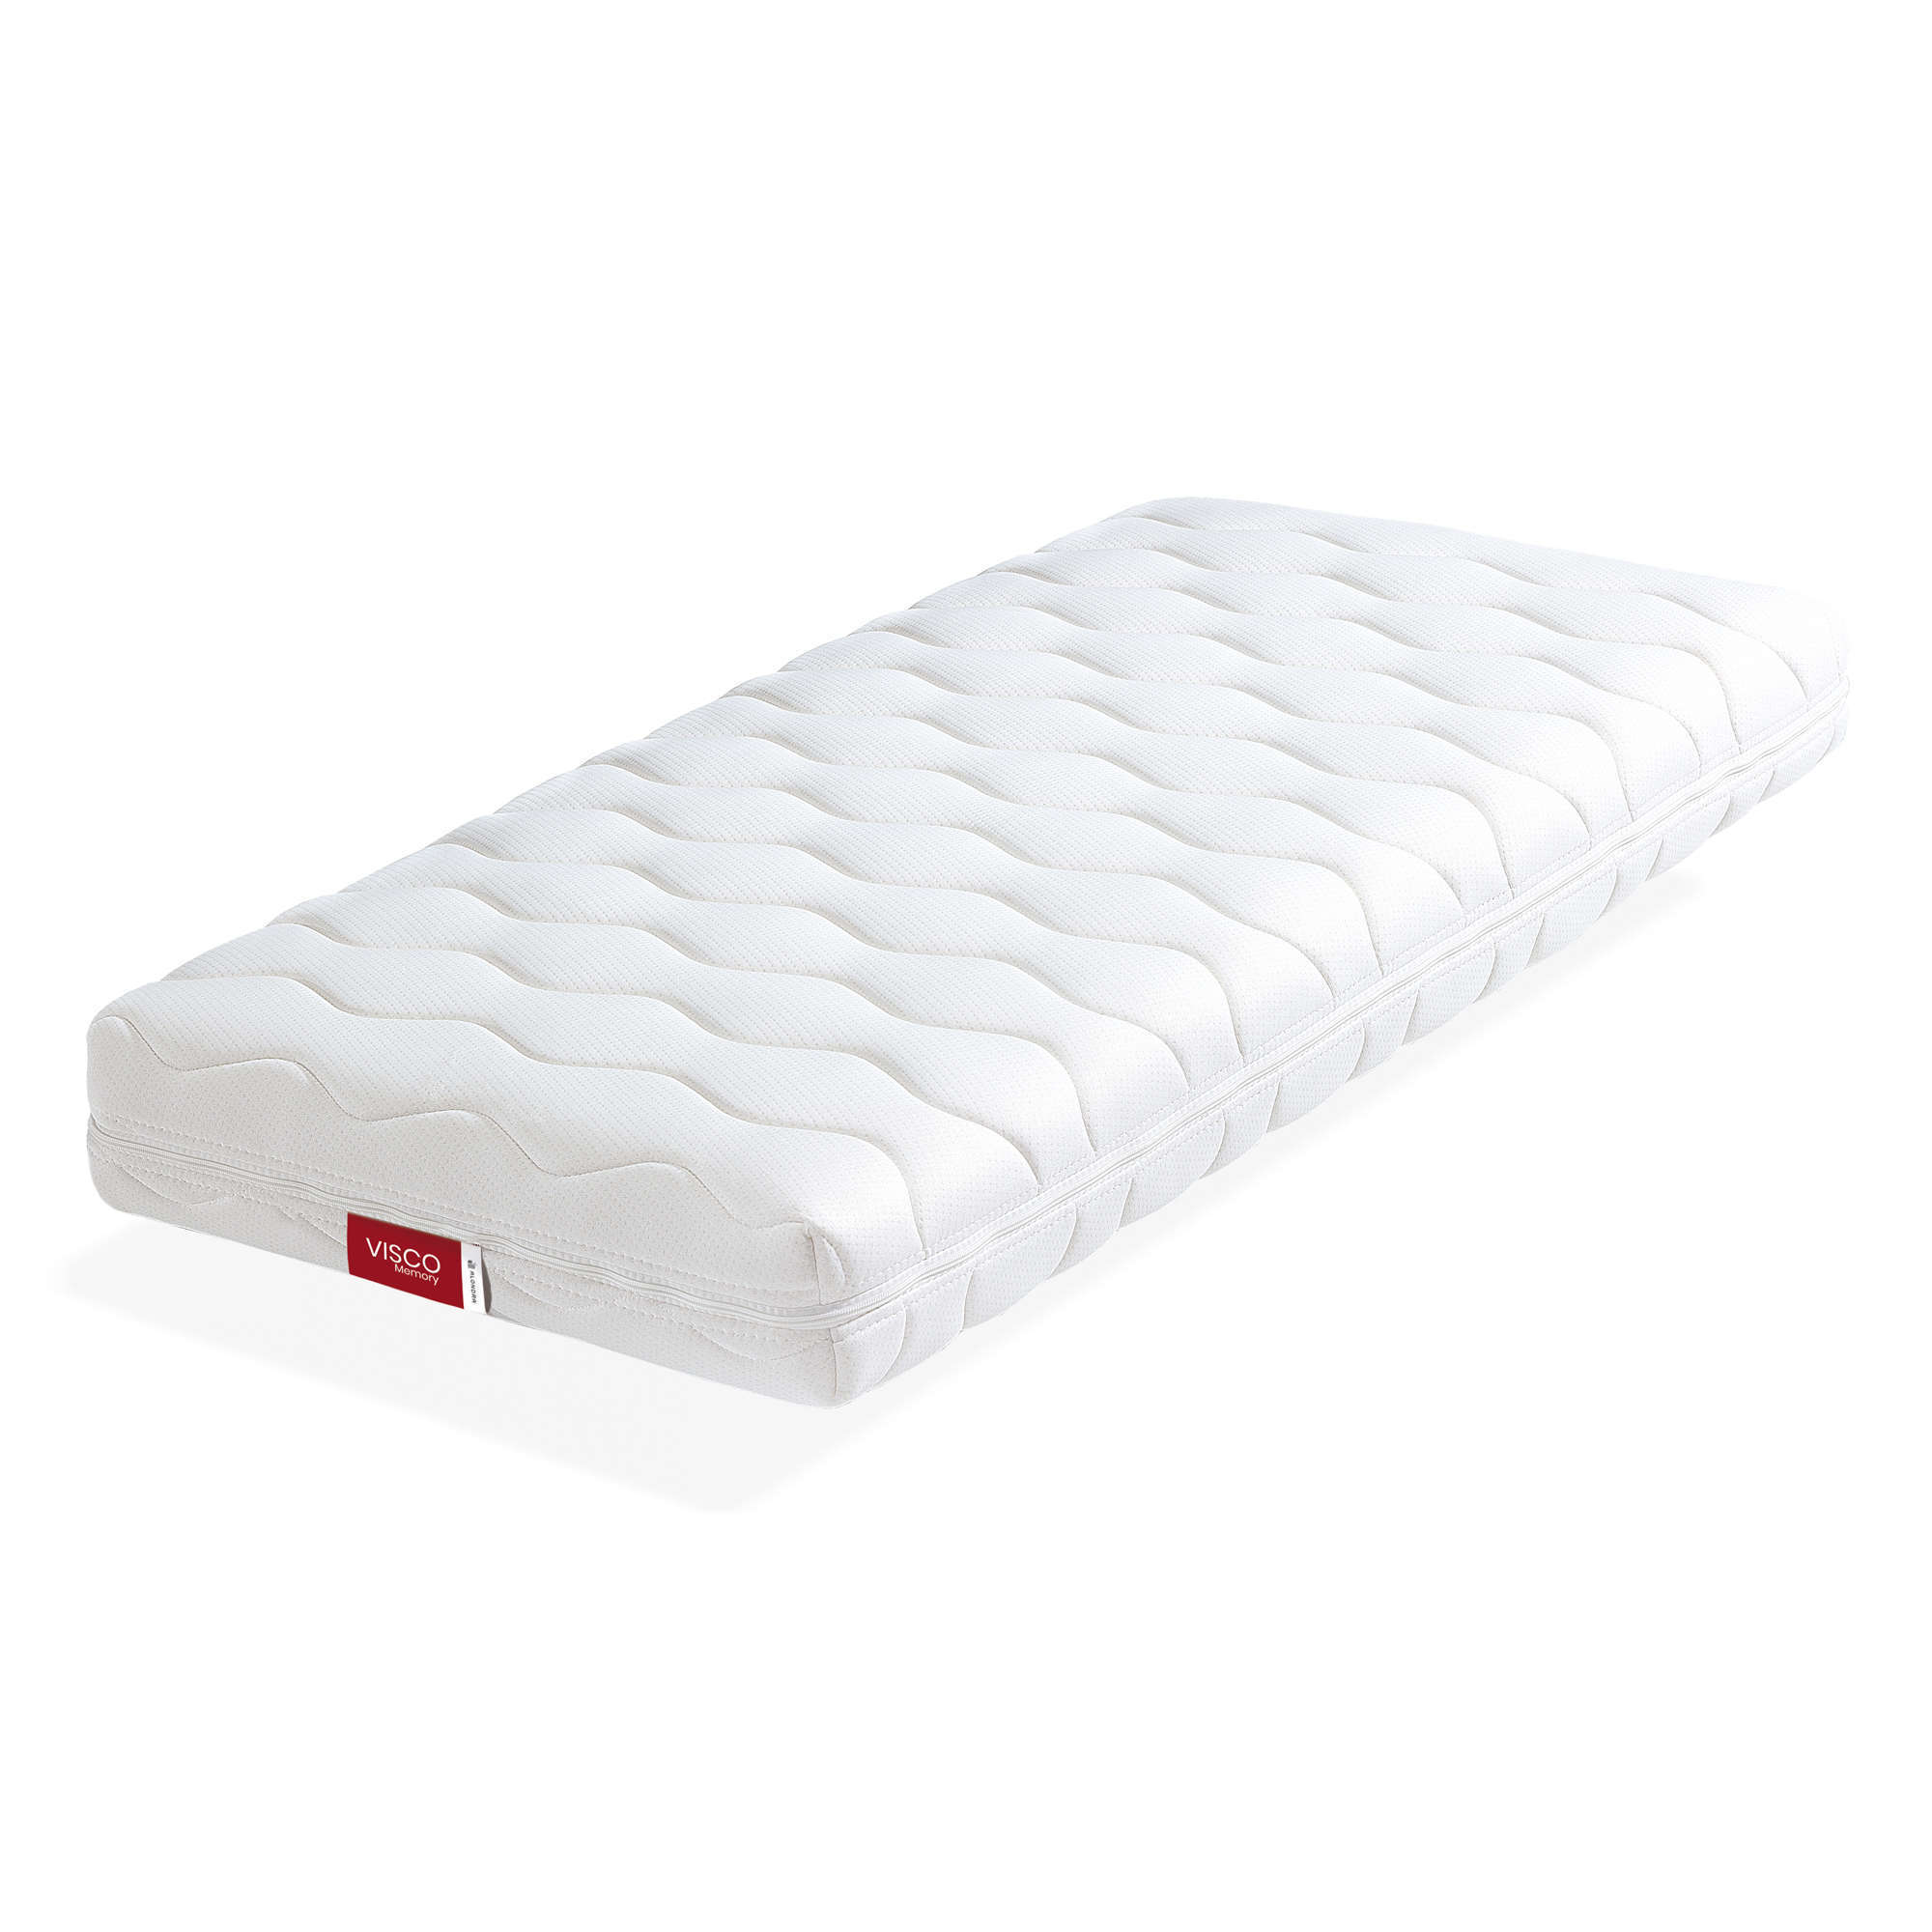 Mattresses for convertible co-sleeping cot